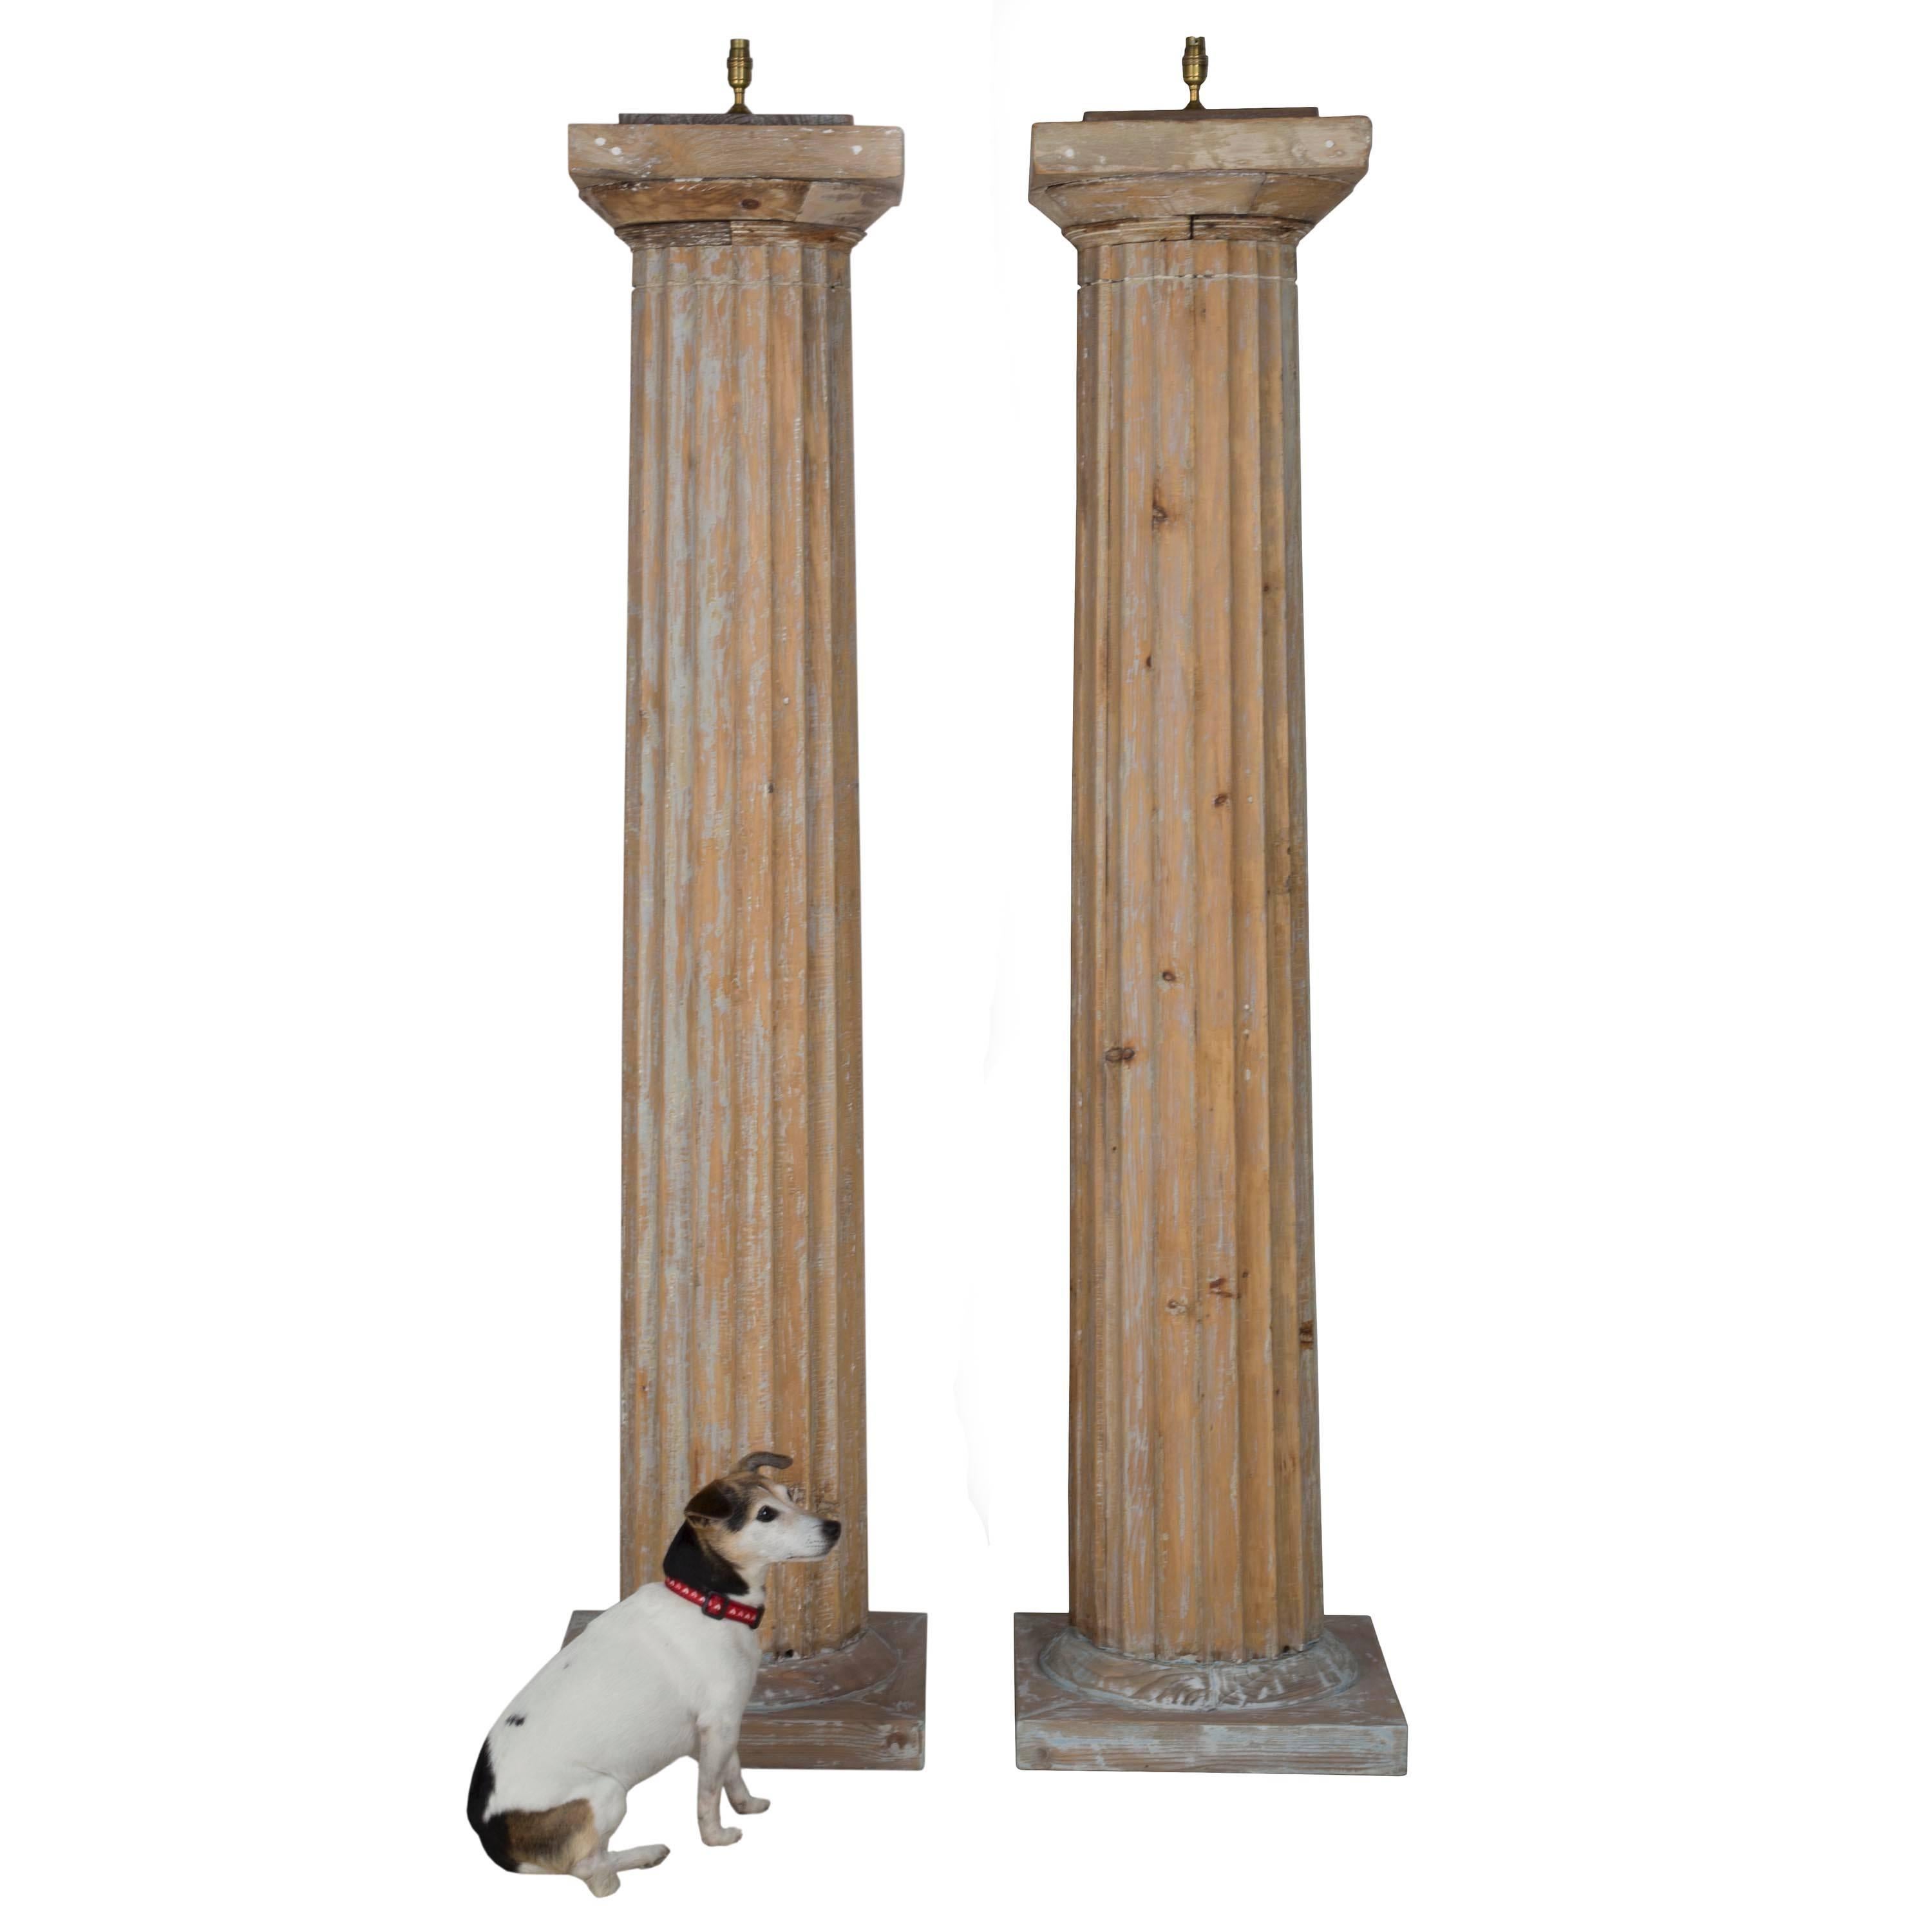 A wonderful over scale pair of mid-late 19th century fluted pine columns in traces of early paint converted to lamps. 